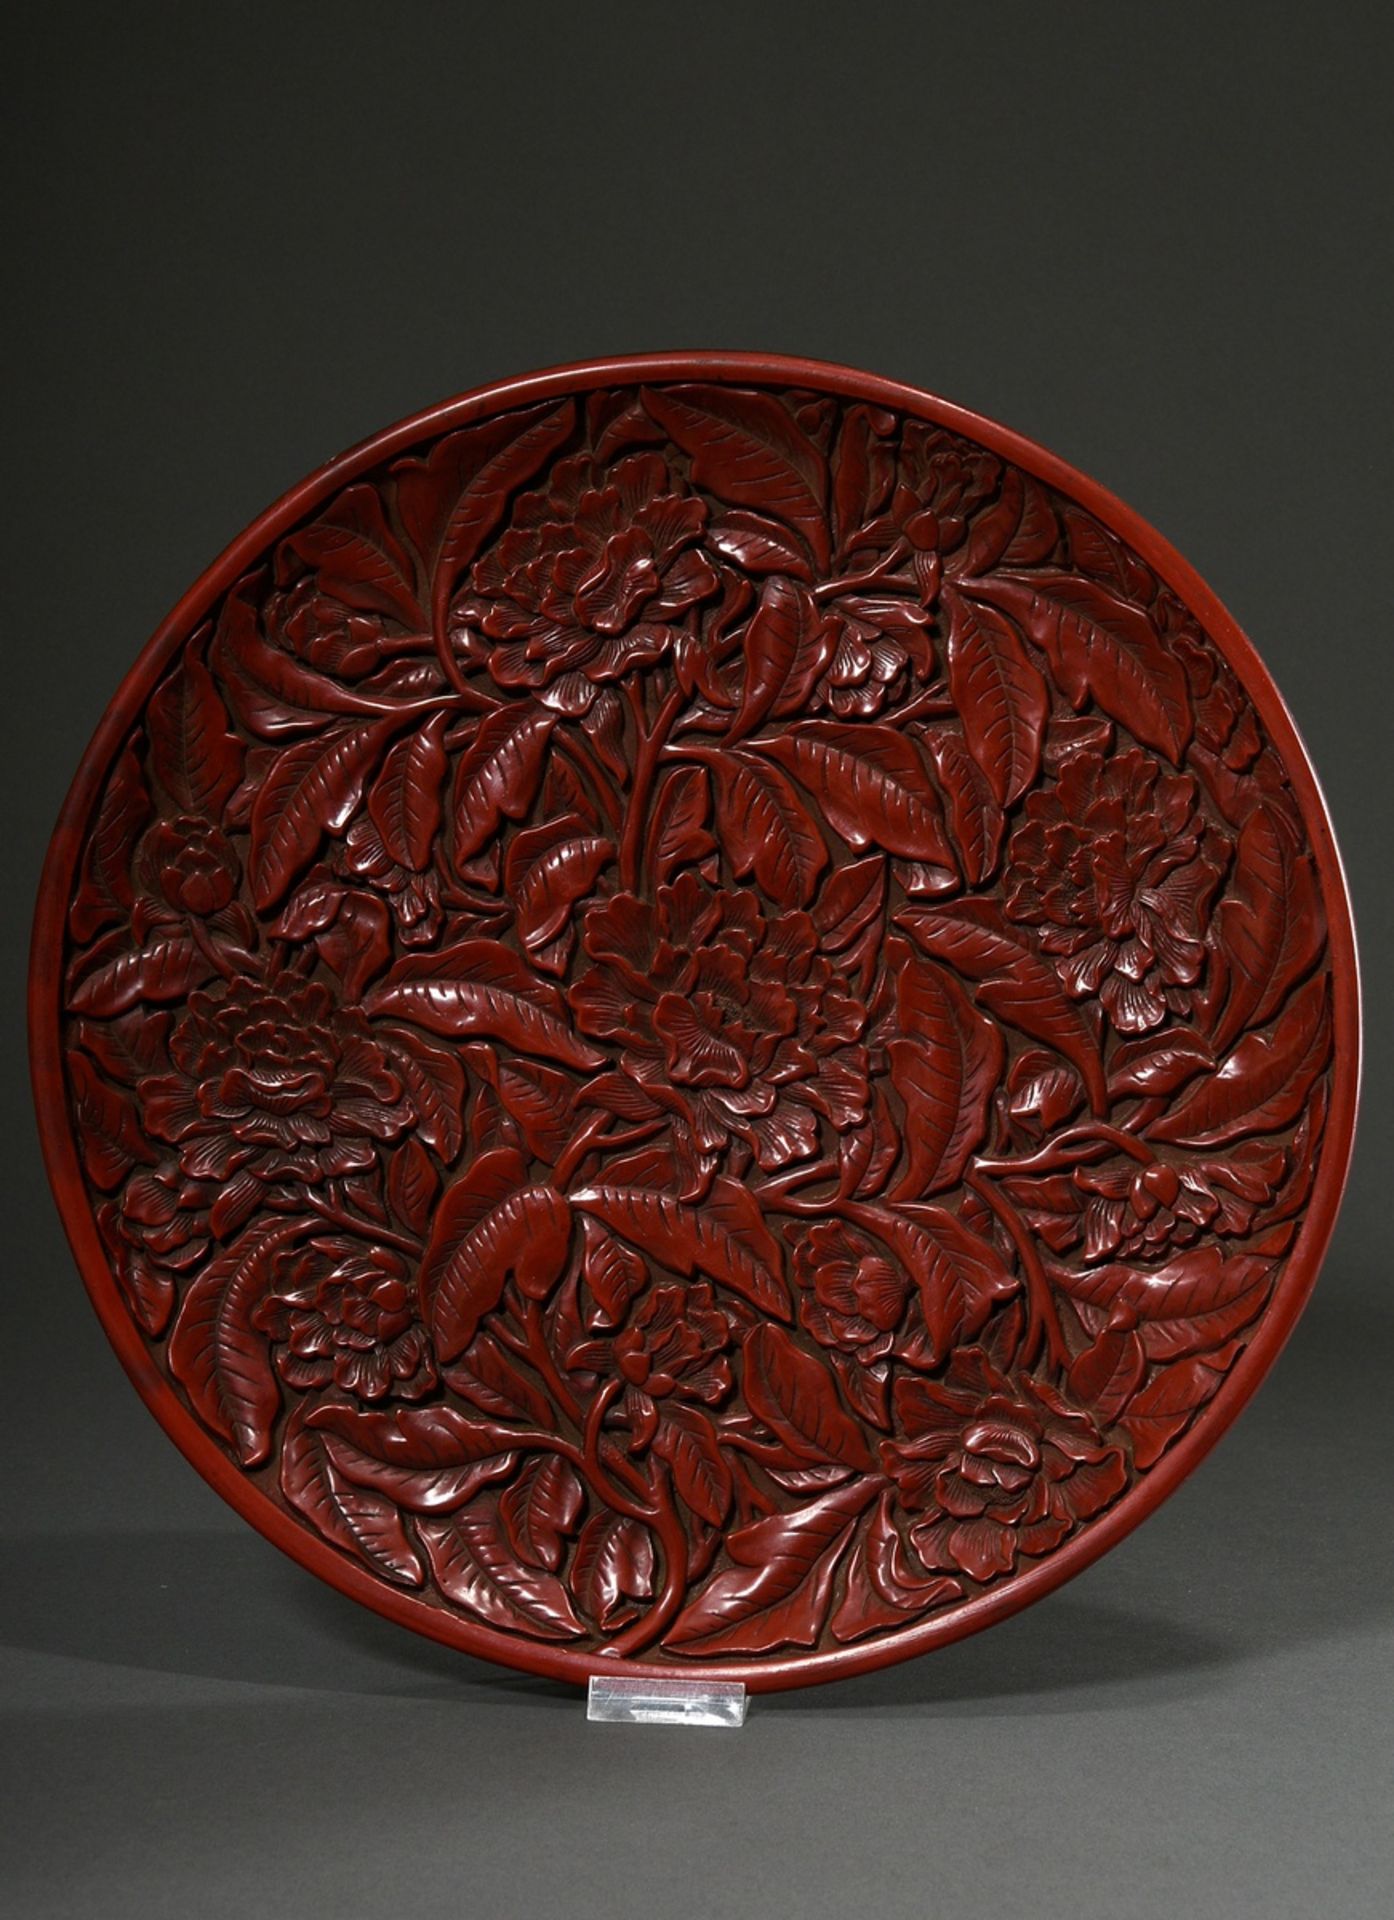 Red carved lacquer plate in the style of the early Ming period "Peonies", bottom with gold inscript